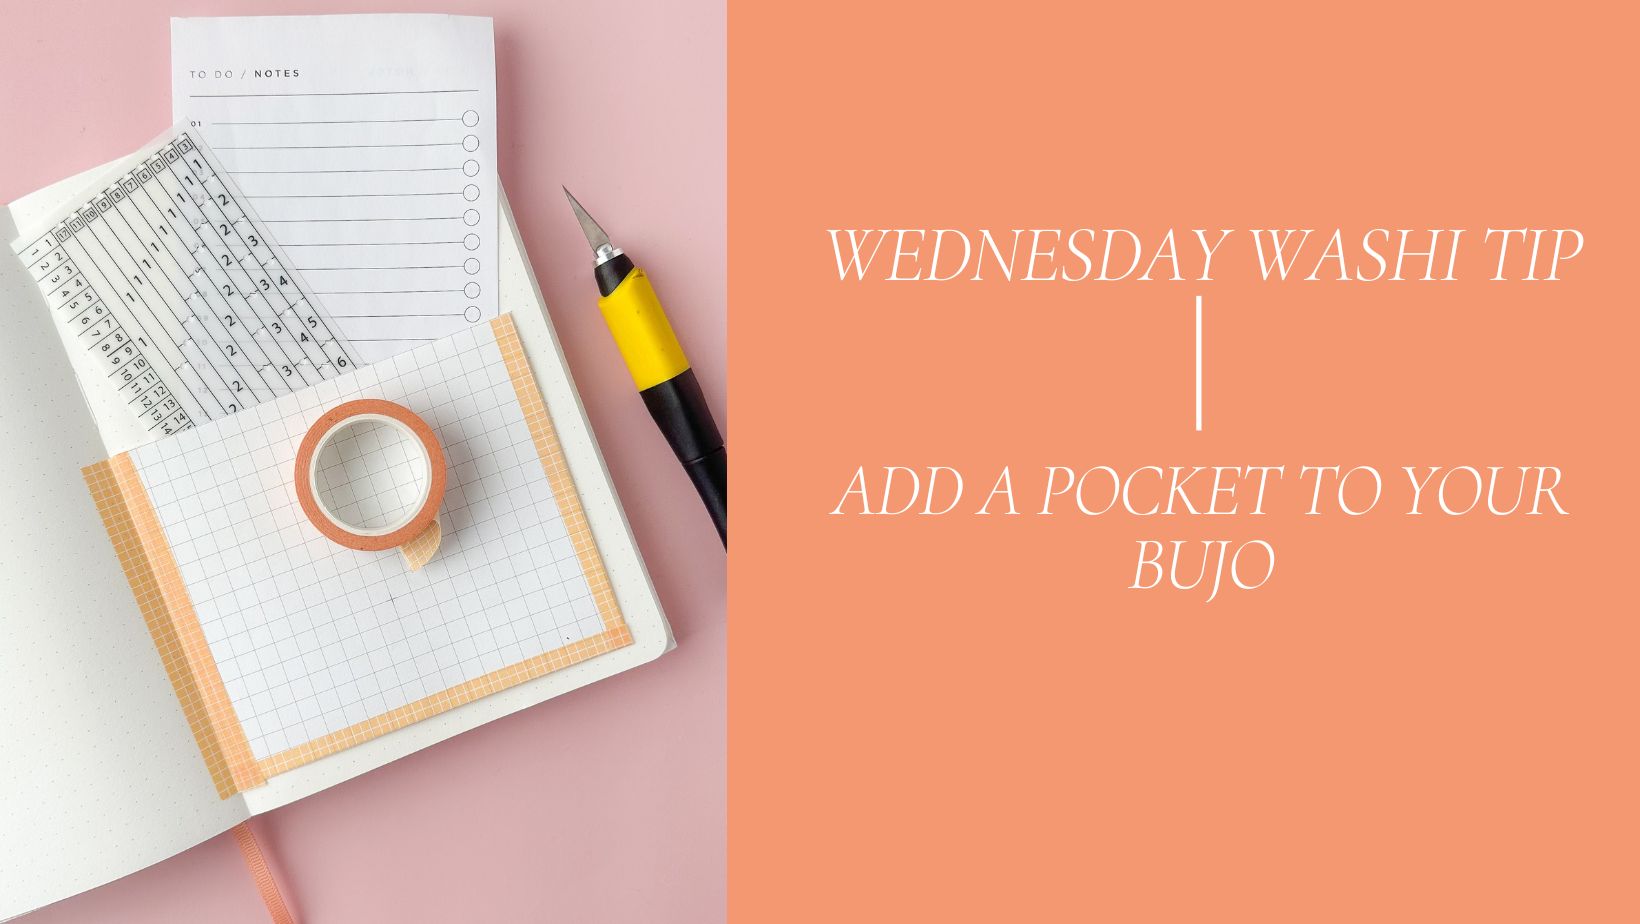 Add a Pocket to your BUJO - Wednesday Washi Tip